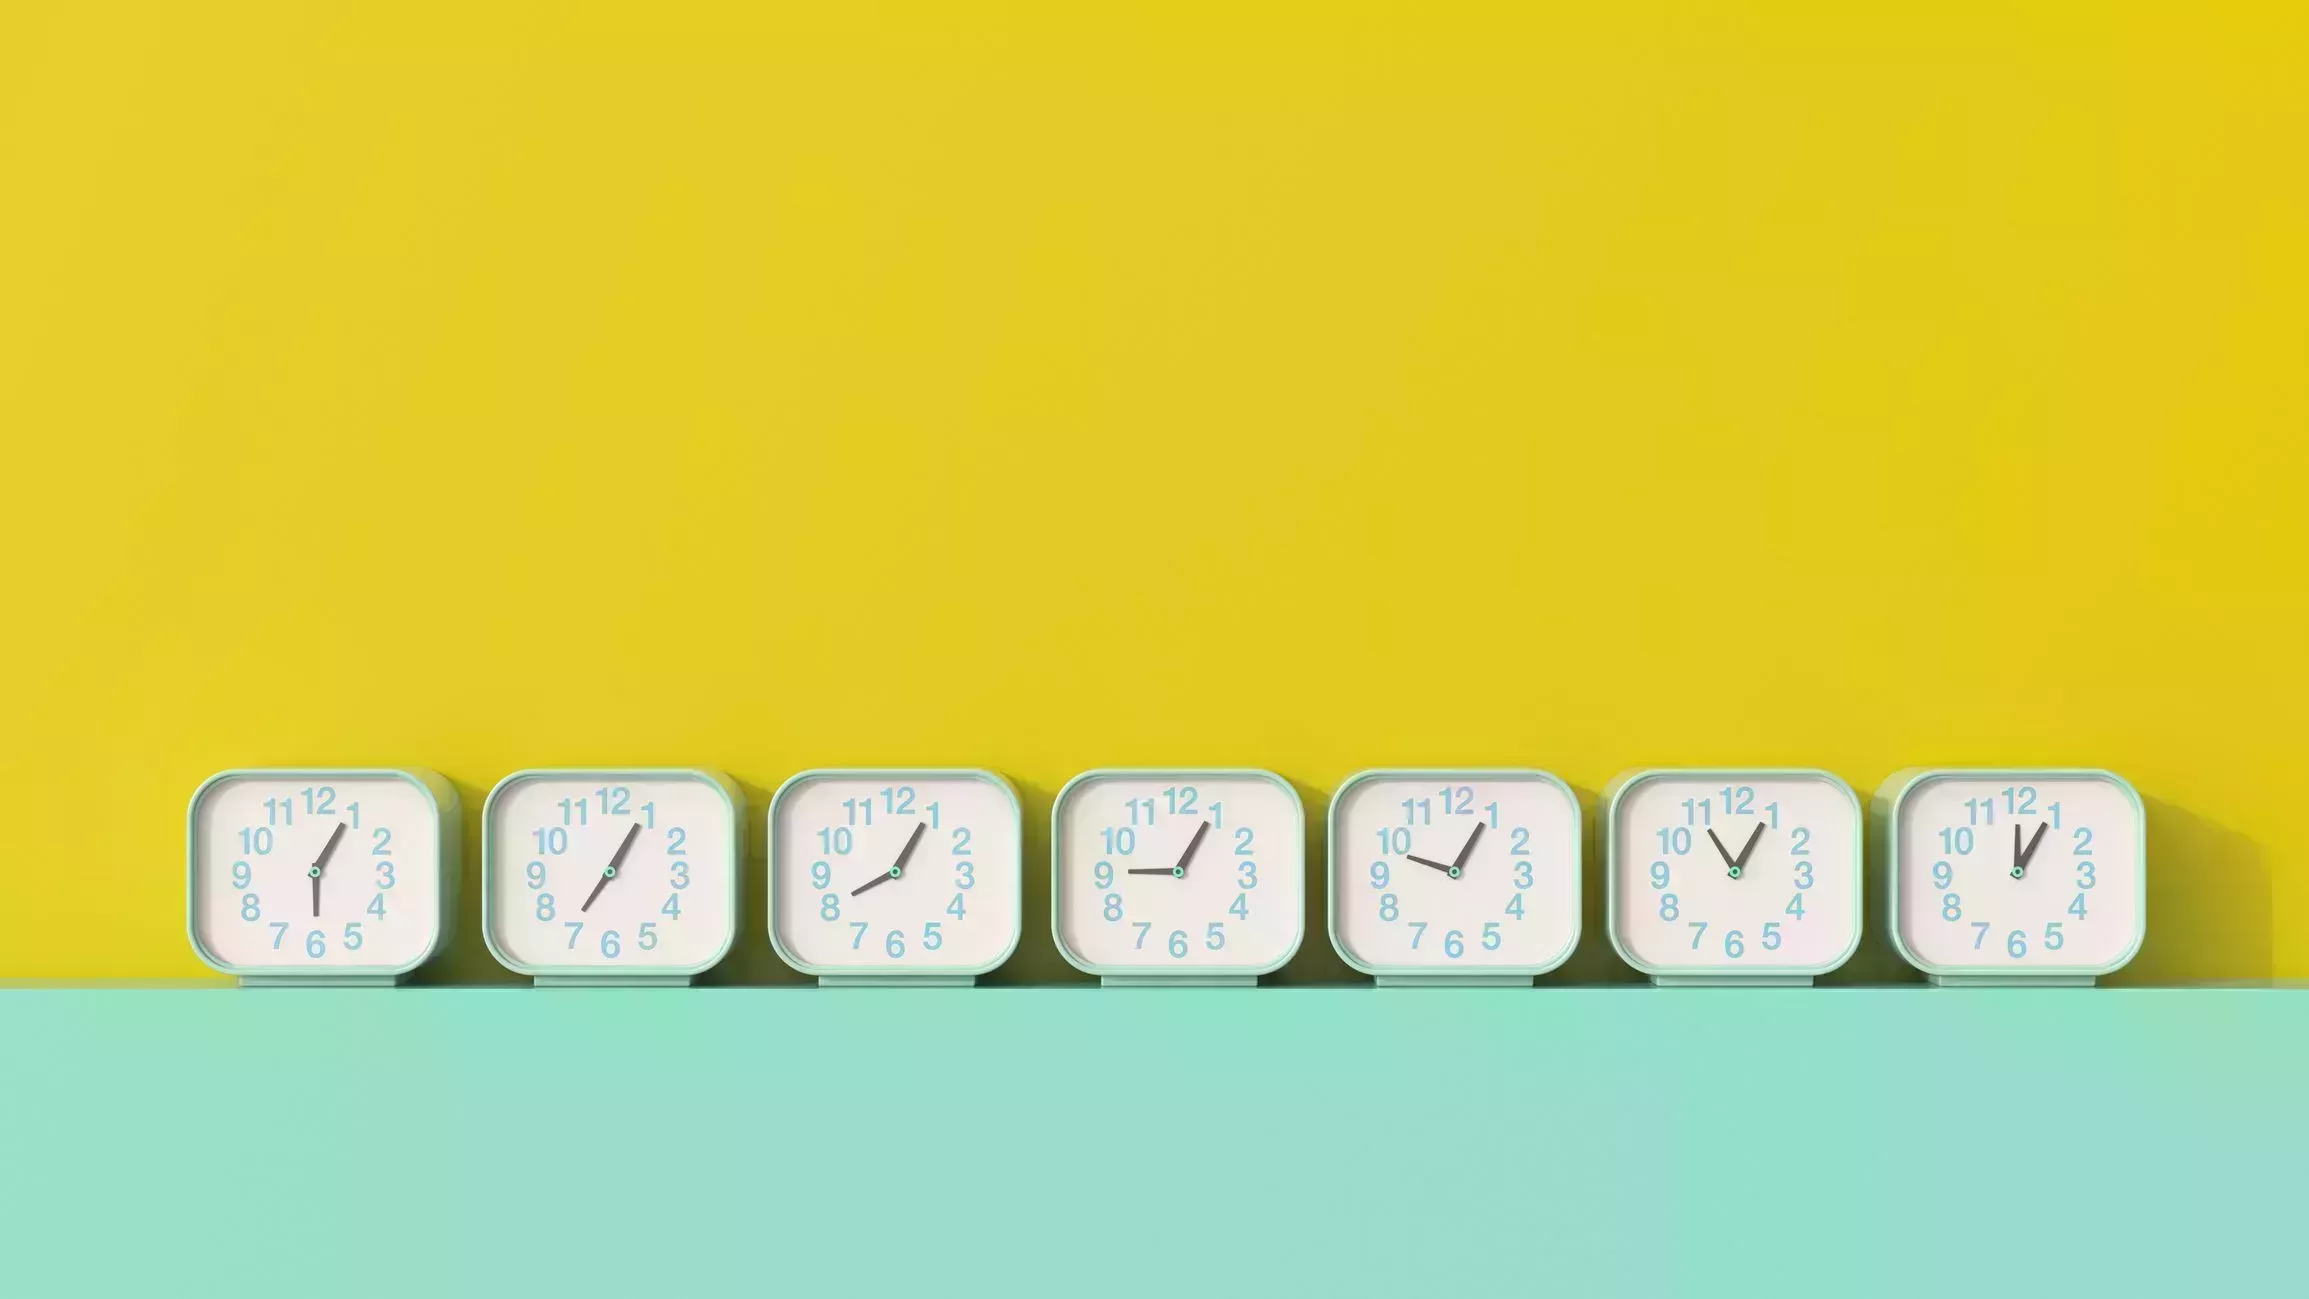 3d rendering, row of alarm clocks, showing different times